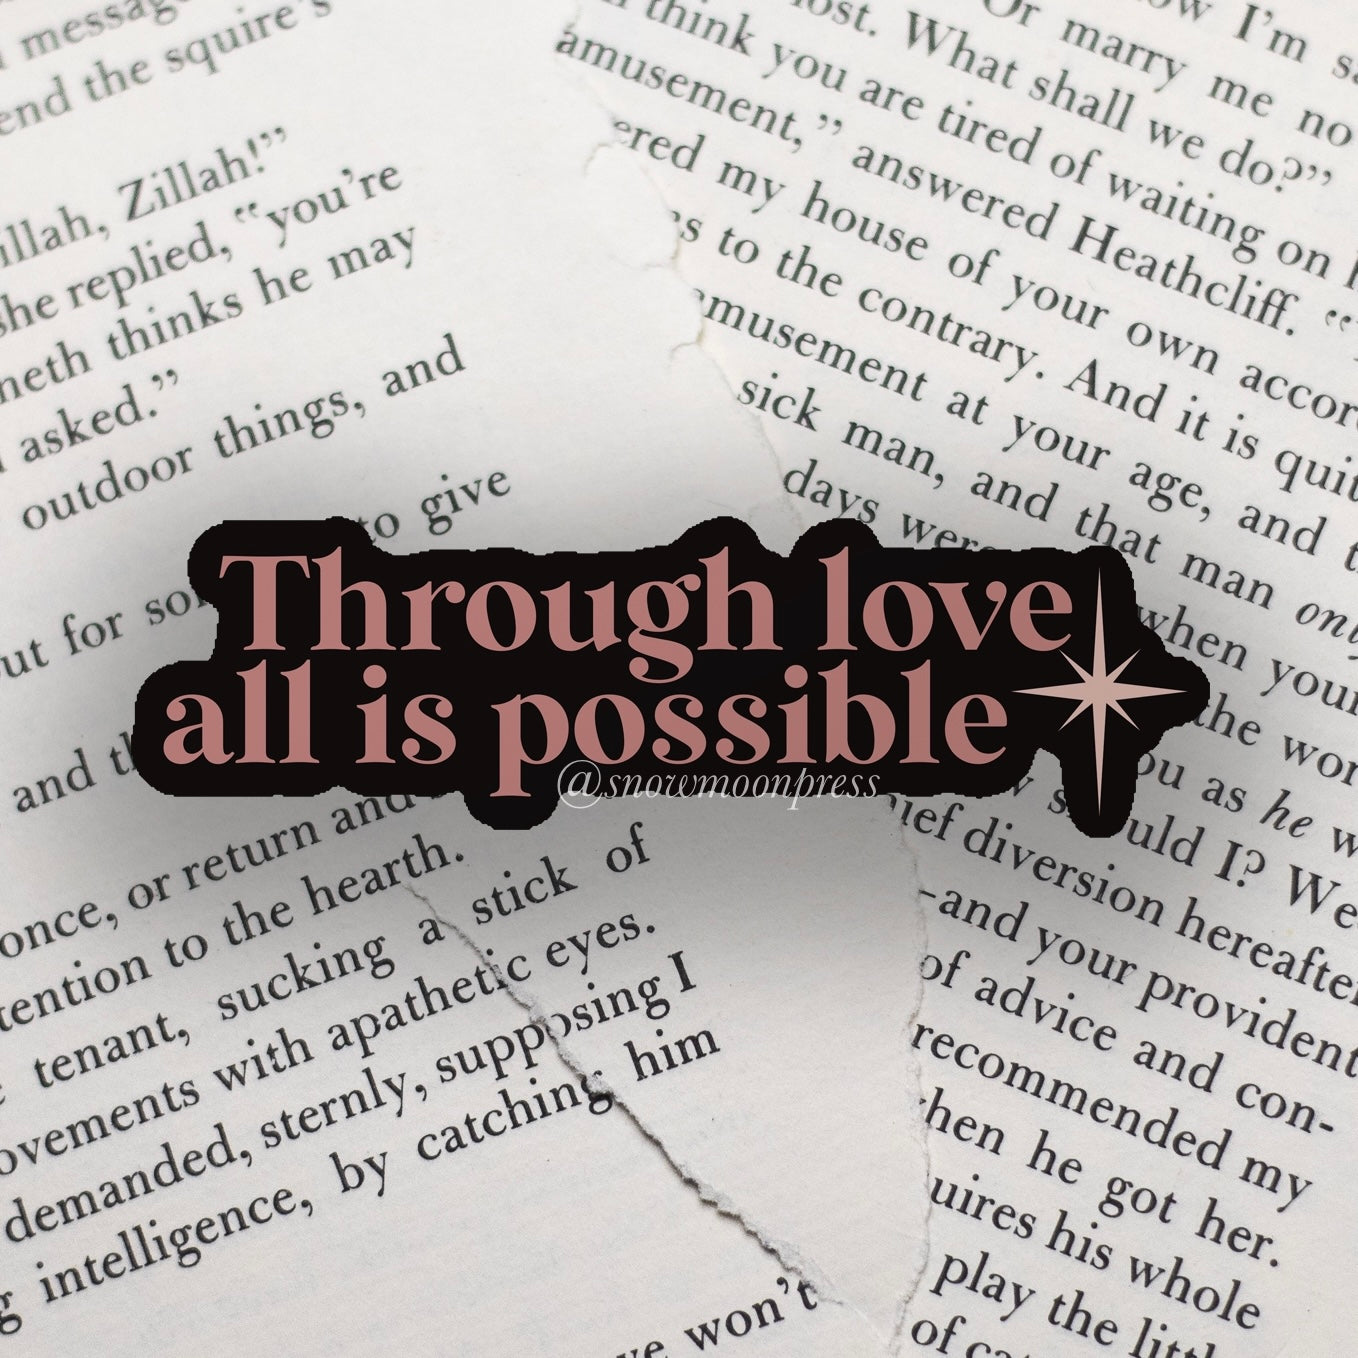 Through love all is possible